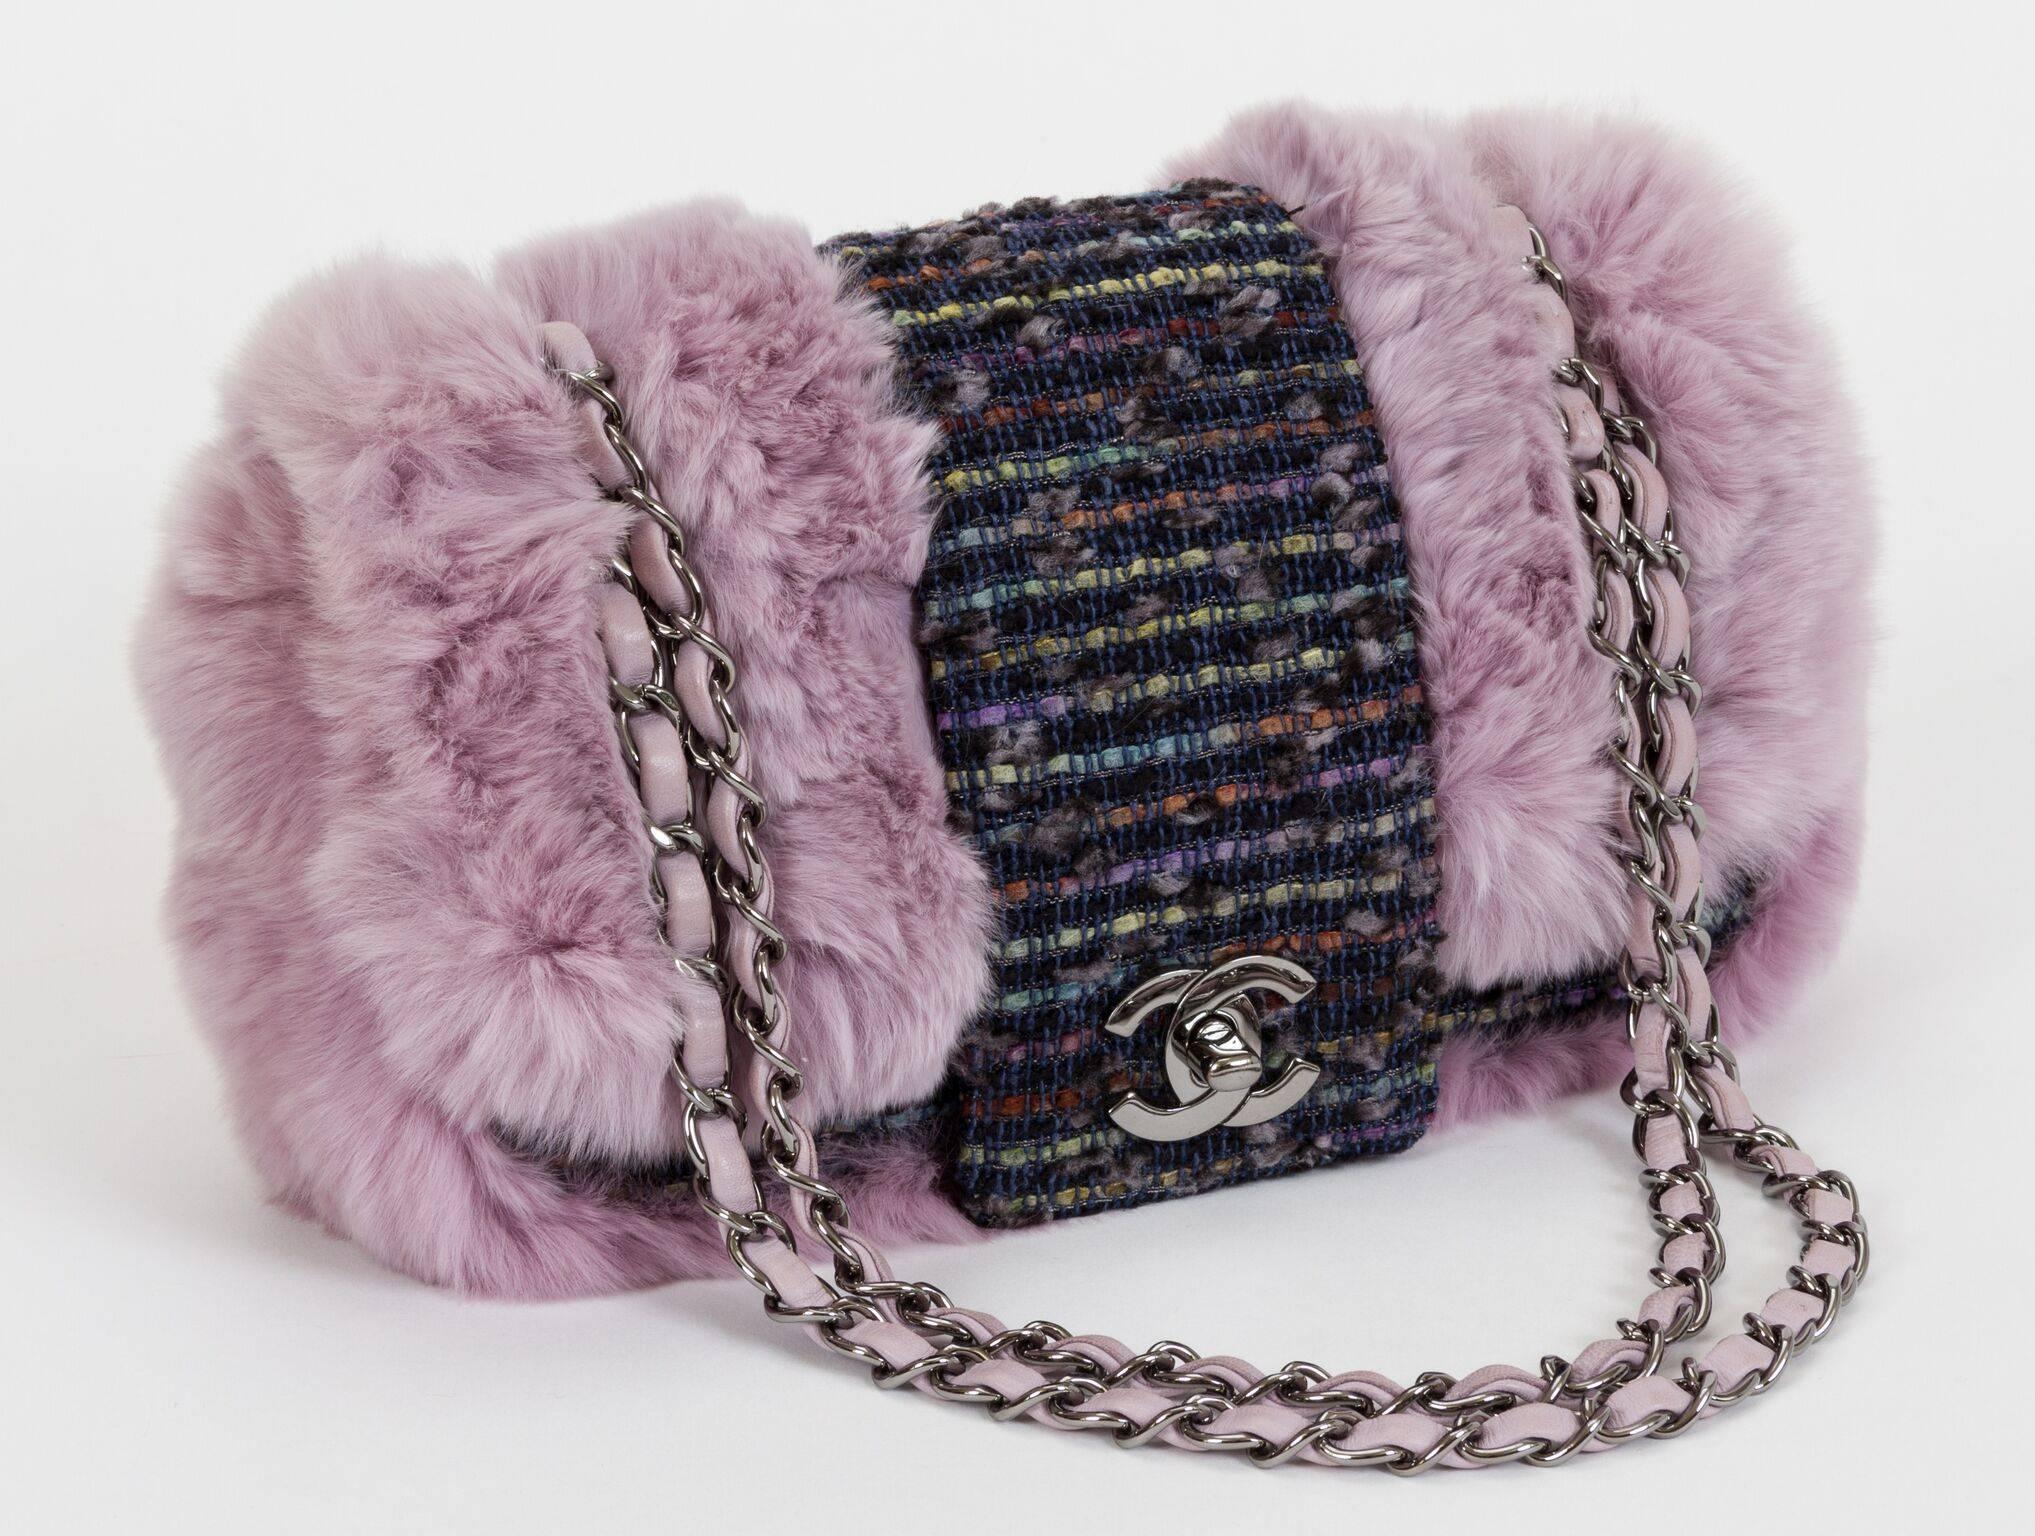 Chanel tweed and glicine lapin single-flap bag. Shoulder strap, 9"L/17"L. Comes with hologram, ID card, and original box.
